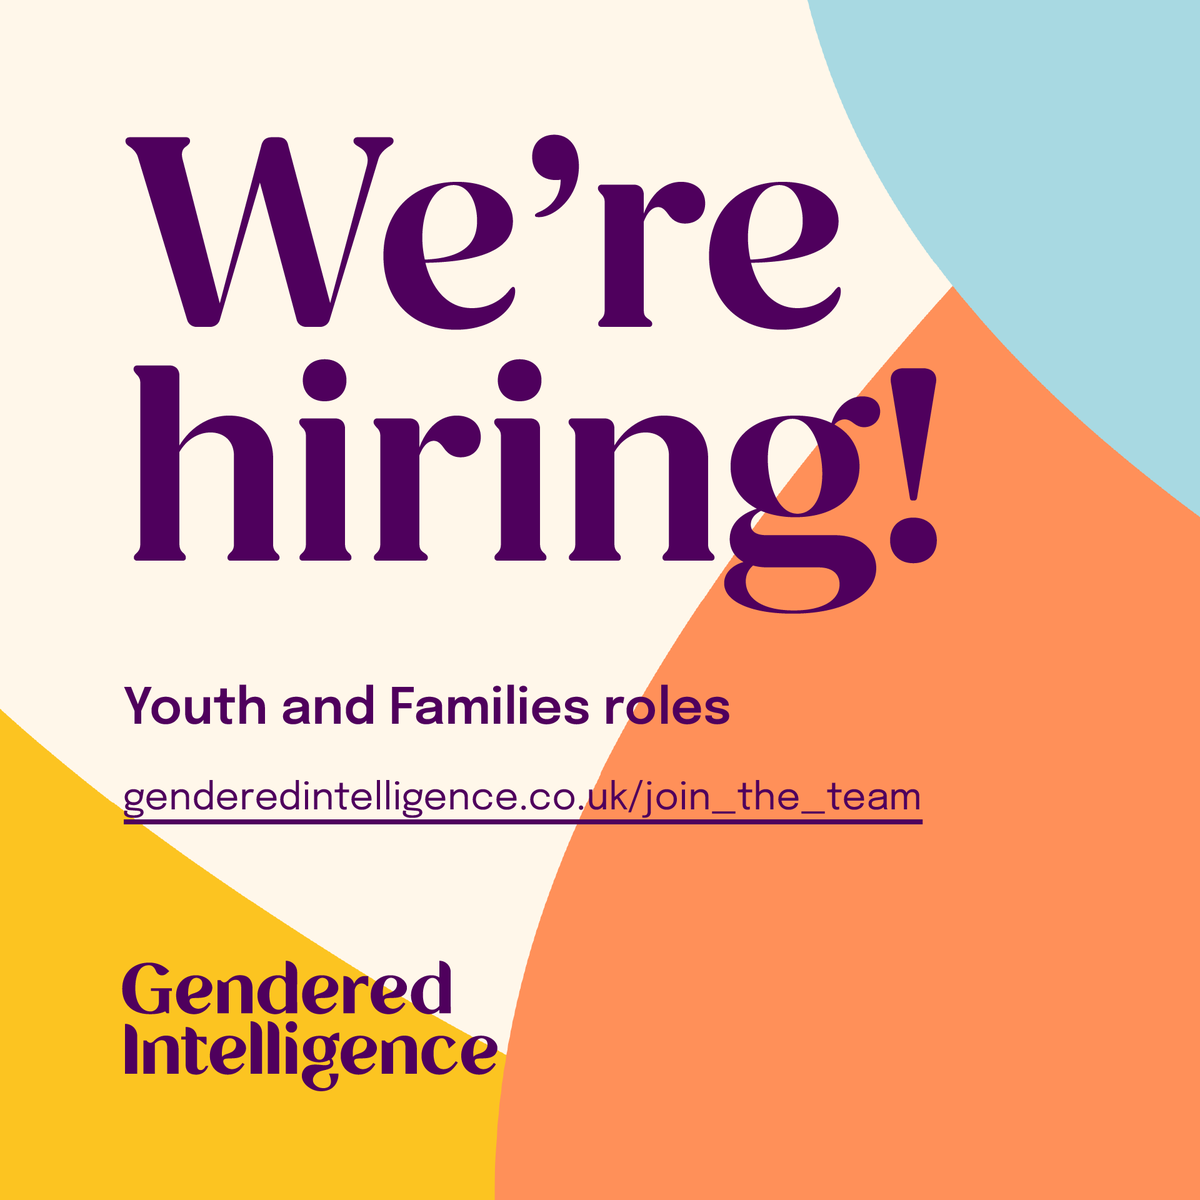 Our Youth and Families Team are hiring three roles! If you're passionate about youth advocacy, with a talent for crafting impactful initiatives, then click the link to find out more. All roles are closing on 10th May at 9am. genderedintelligence.co.uk/join-the-team